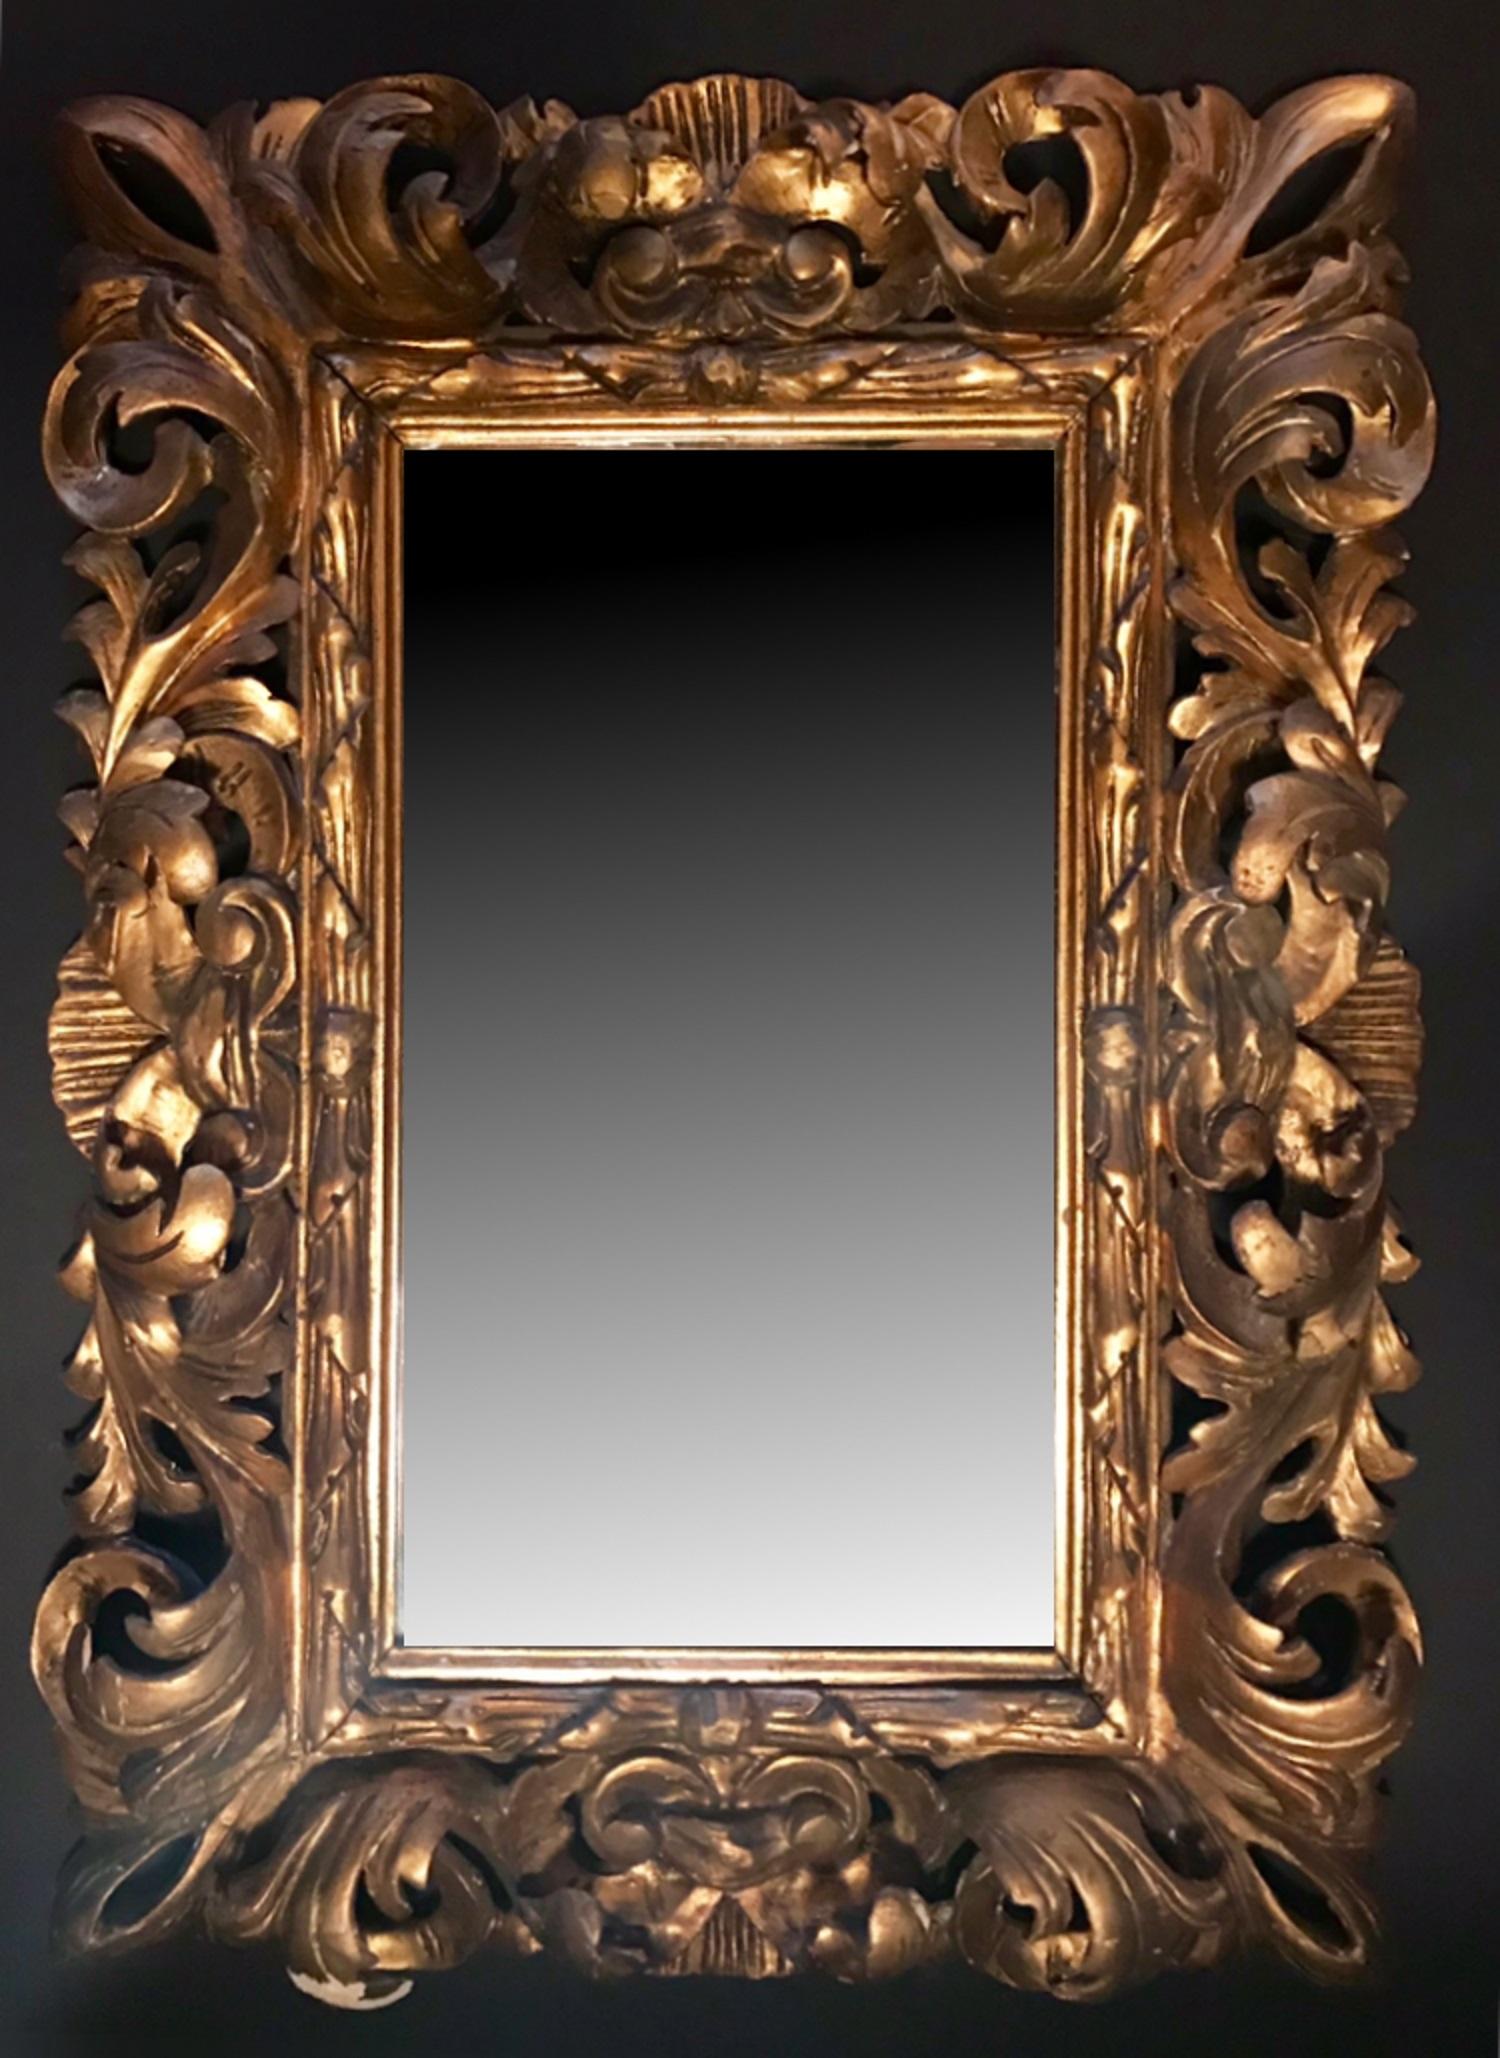 This is a beautiful hand carved and gilded mirror frame. It is a dramatic wall hanging with a stunning depth of more than 3 inches. The circa 1880 Baroque style frame was created in Florence, Italy. The gilt is original to the period and has